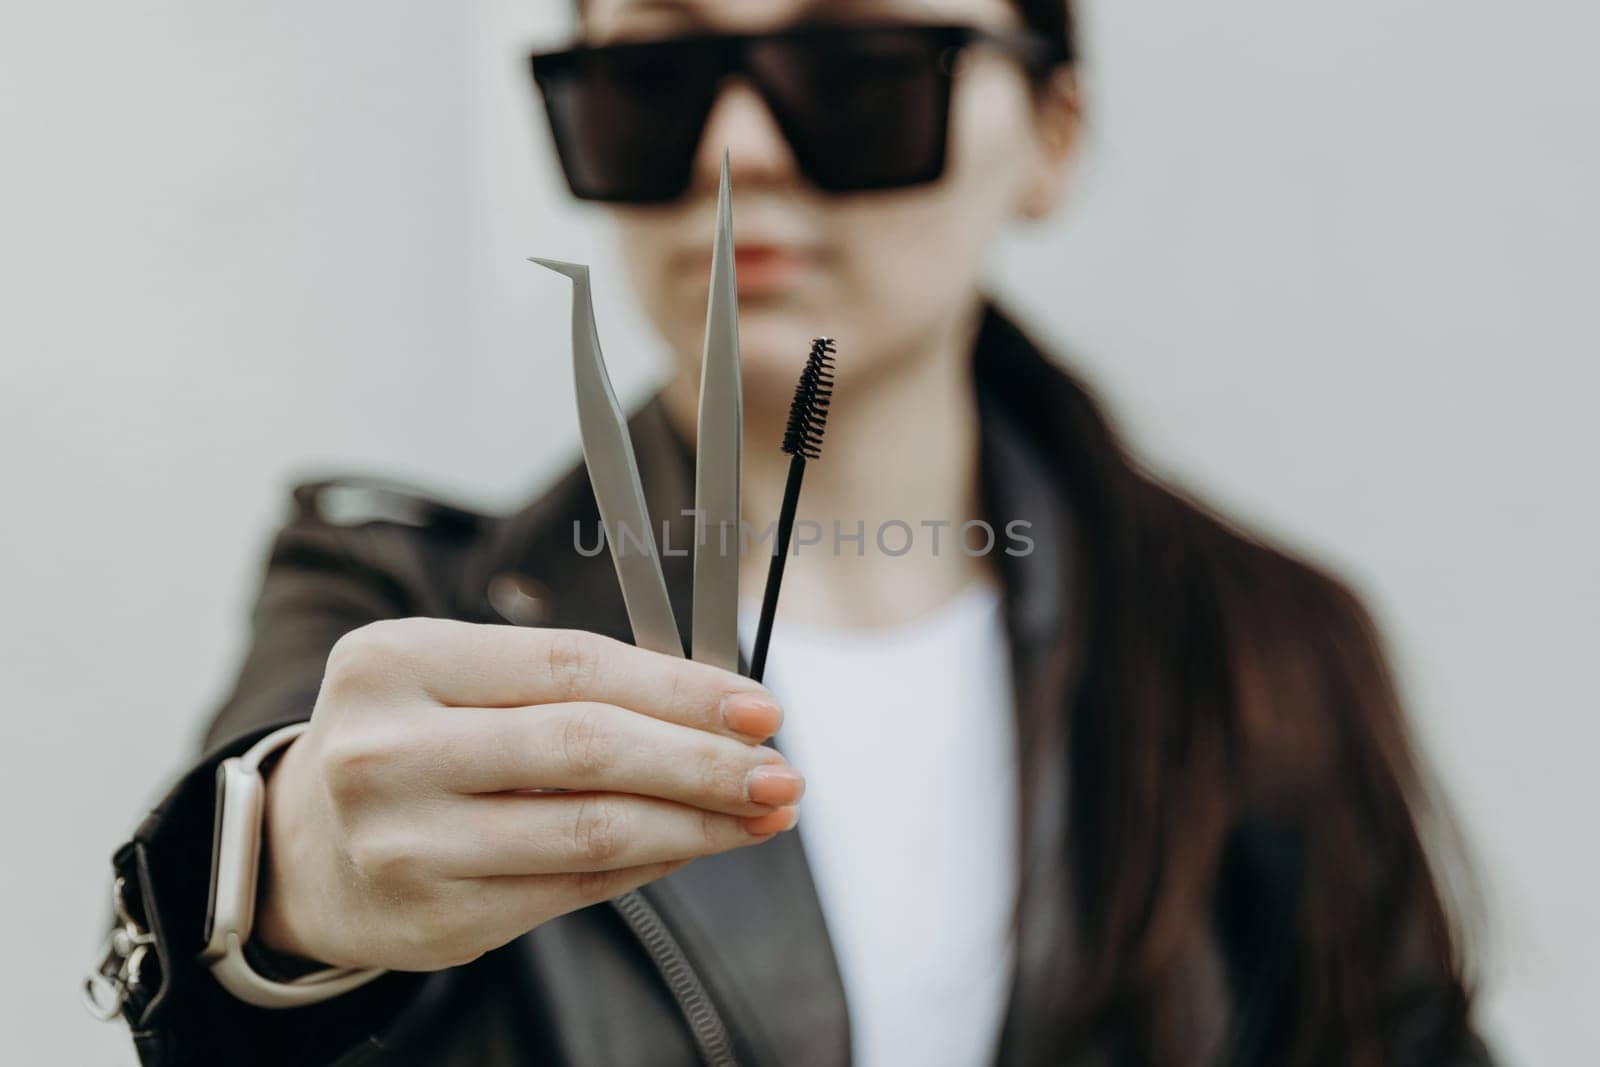 Portrait of one young beautiful Caucasian girl in sunglasses, leather jacket shows two tweezers and one eyelash extension brush with one hand, standing near a white wall on a spring day and looking at the camera, close-up side view with depth of field.